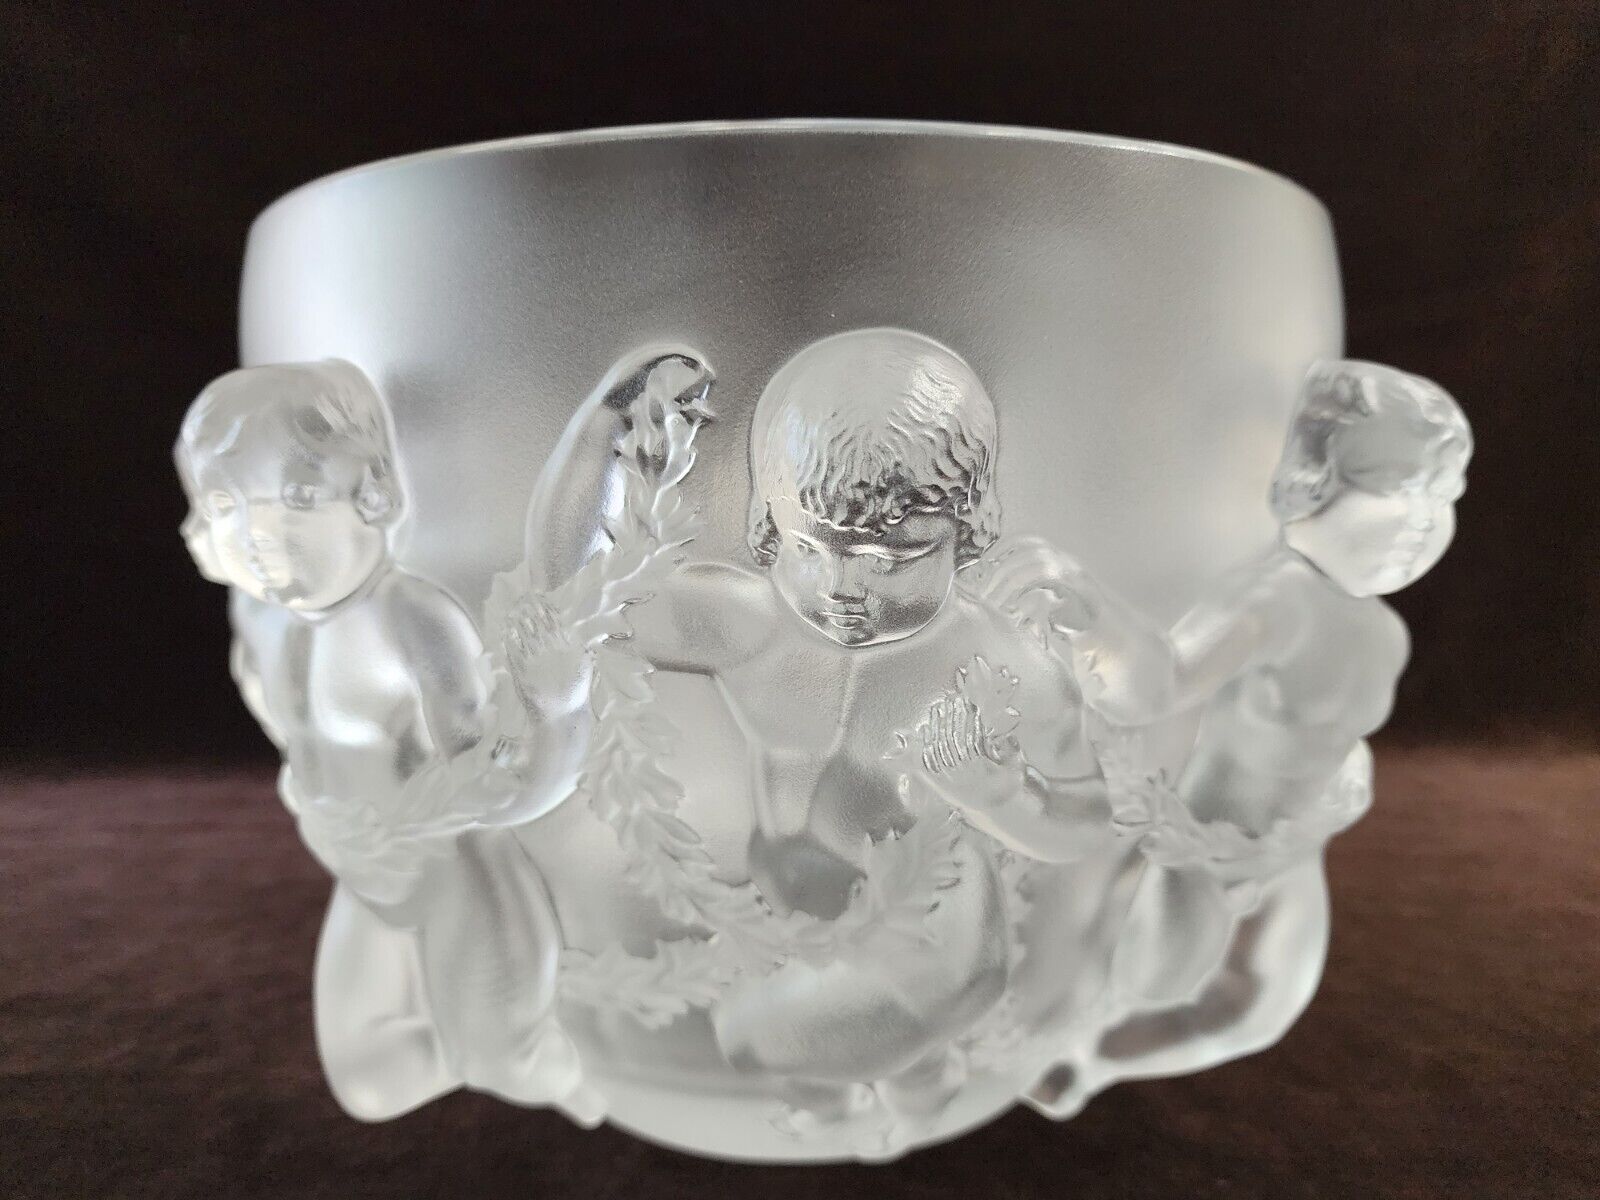 NOW LALIQUE LUXEMBOURG CHERUB POOL PARTY CENTERPIECE BOWL  BEST PRICE IN TOWN